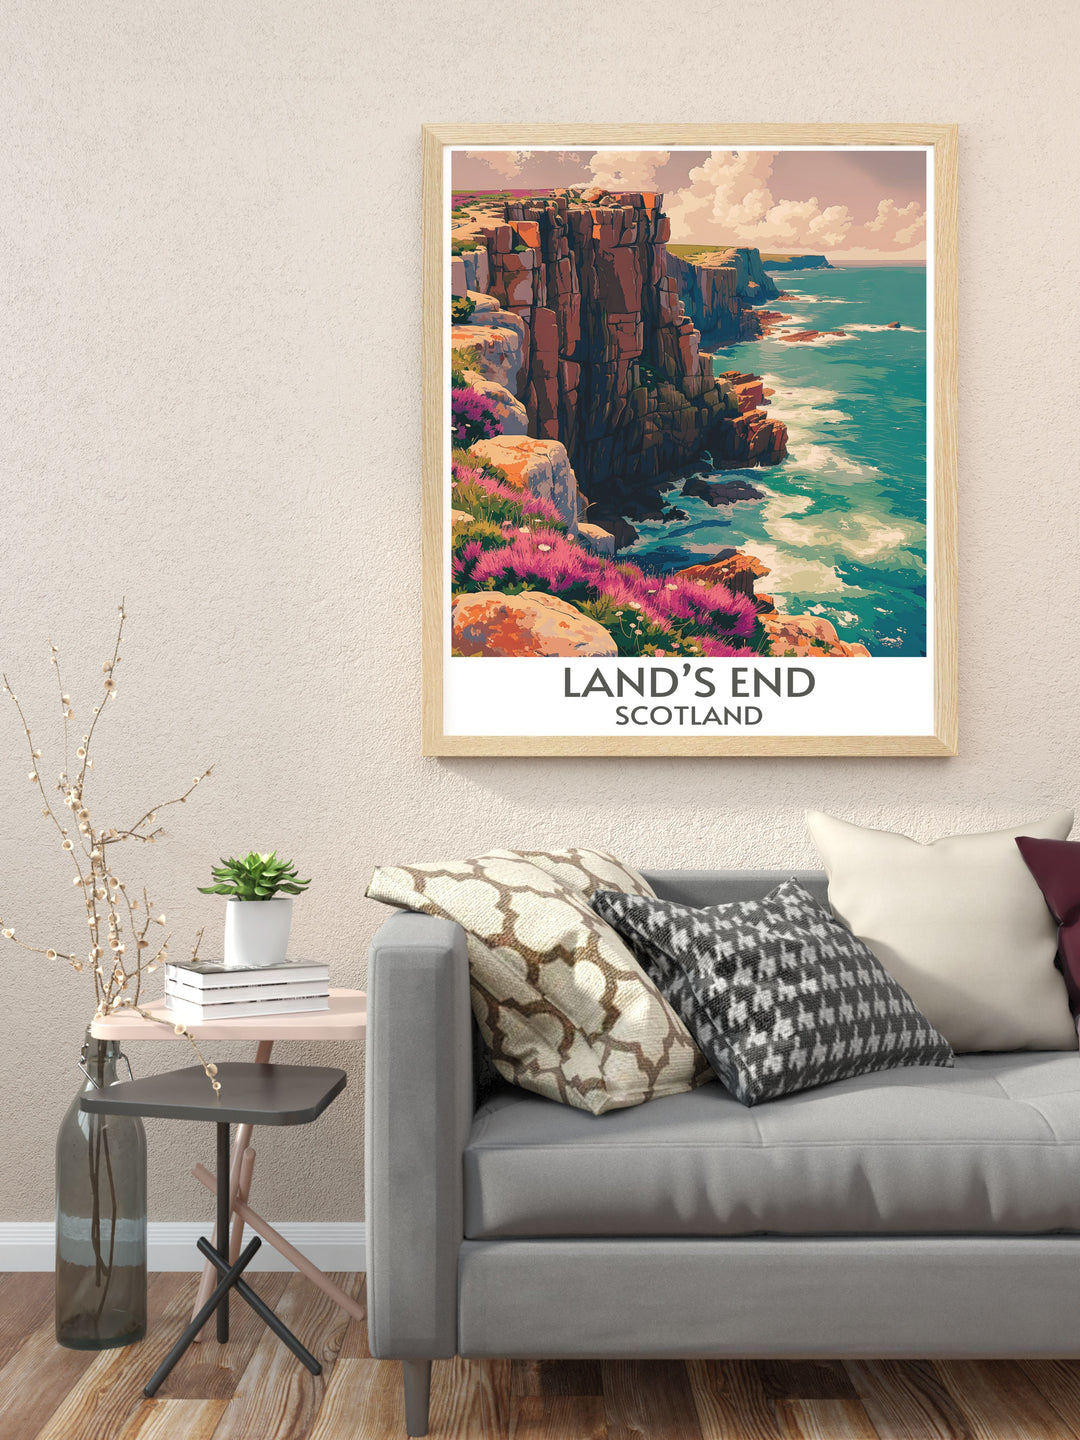 Celebrate the rich history and diverse landscapes of England with our vintage posters. These posters offer a nostalgic glimpse into Englands past, from ancient sites like Stonehenge to the charming streets of historic towns, perfect for adding vintage charm to any room.